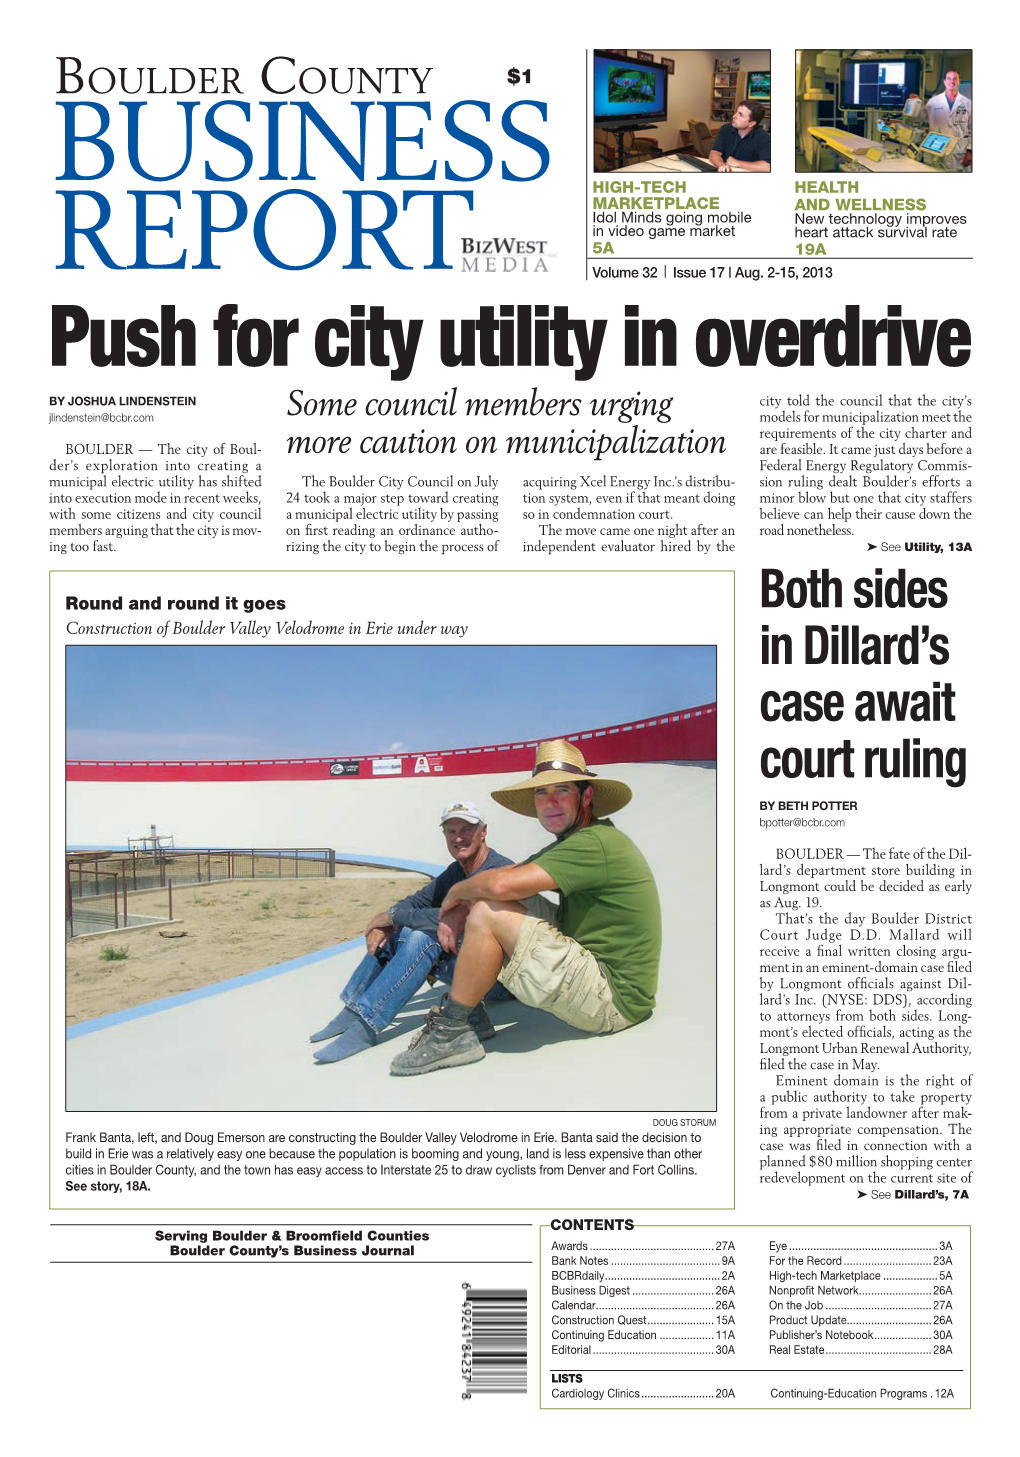 Push for City Utility in Overdrive